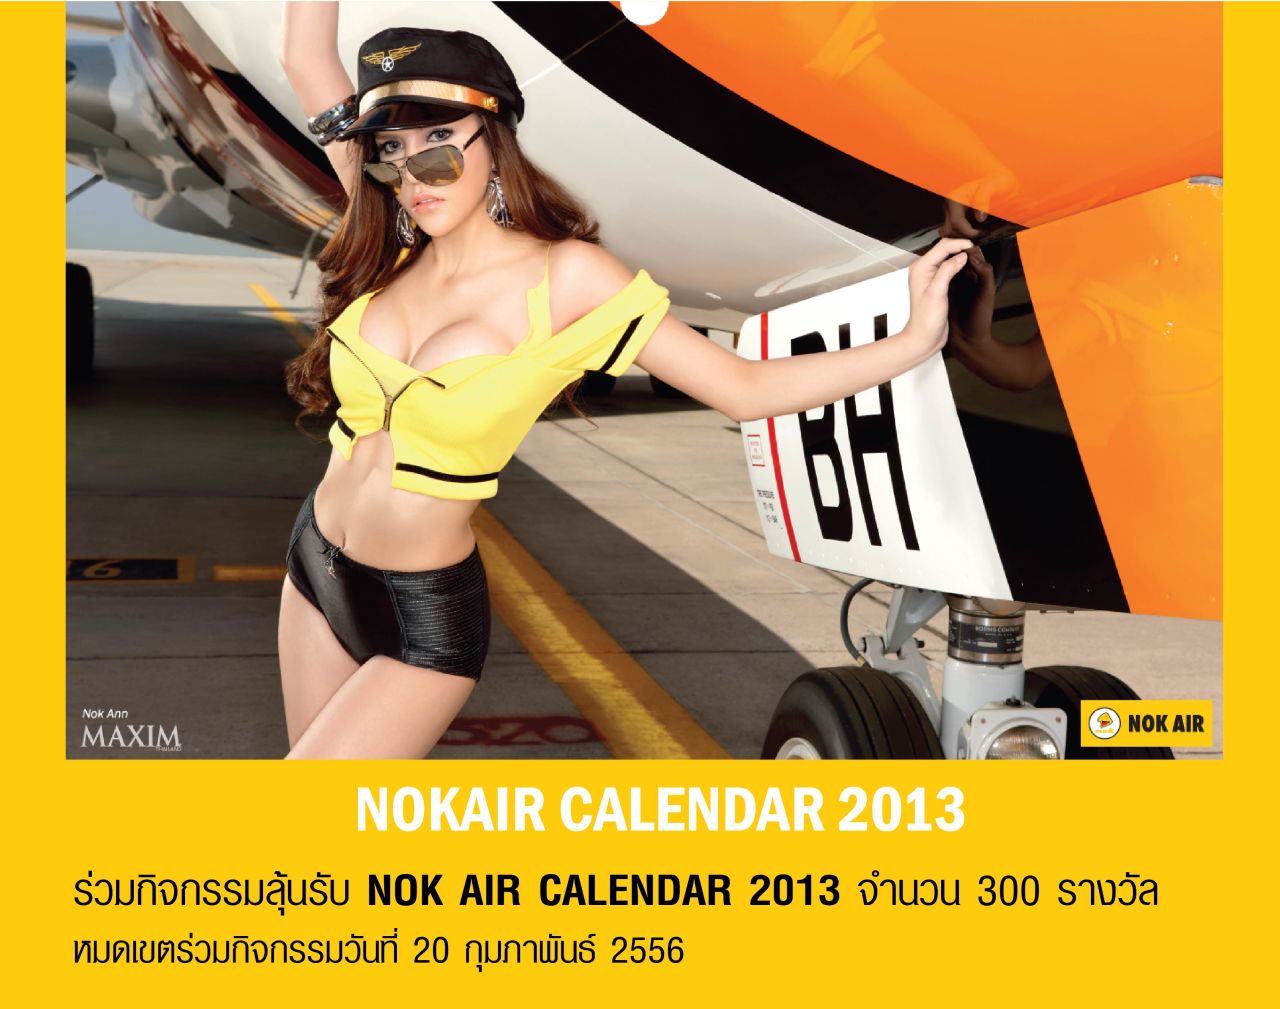 A Thai Maxim model poses for a publicity shoot for Nok Air, a domestic Thai low-cost carrier. Nok Air CEO Patee Sarasin expected the pictures to be "controversial" but he says the company has been "radical from day one."